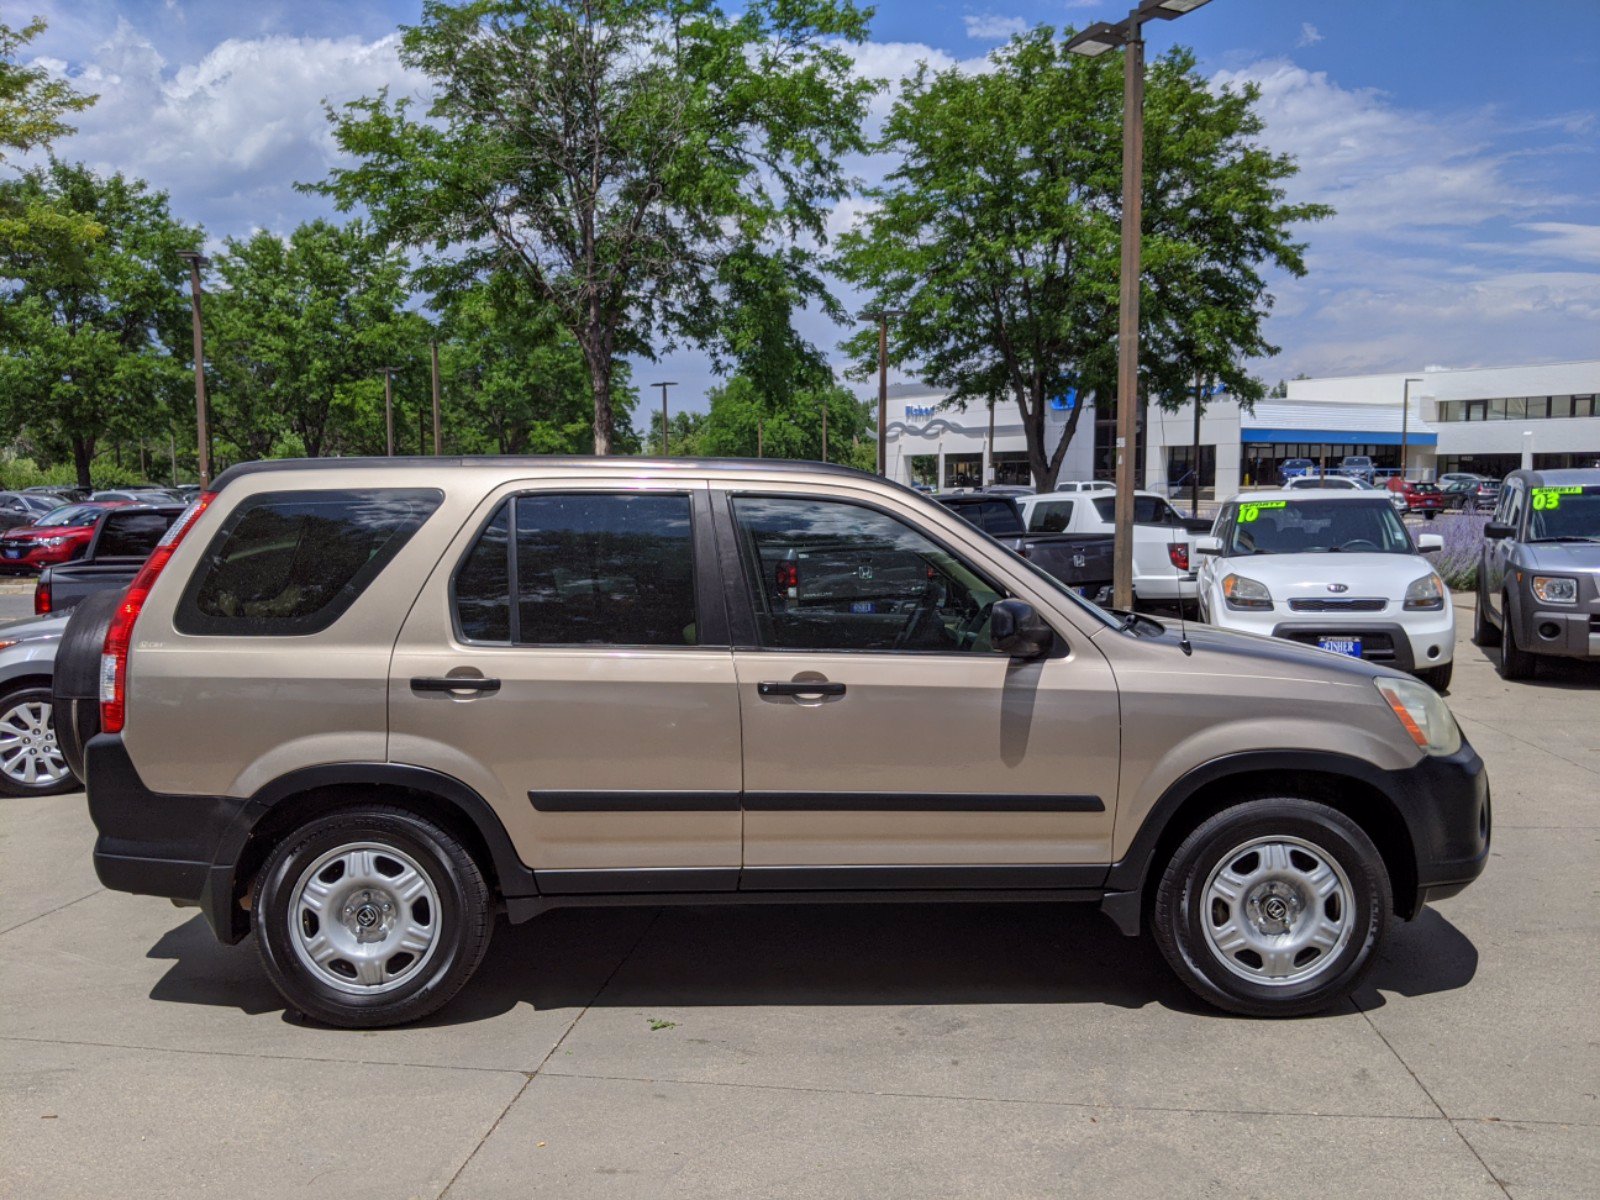 PreOwned 2005 Honda CRV 4WD LX AT Sport Utility in